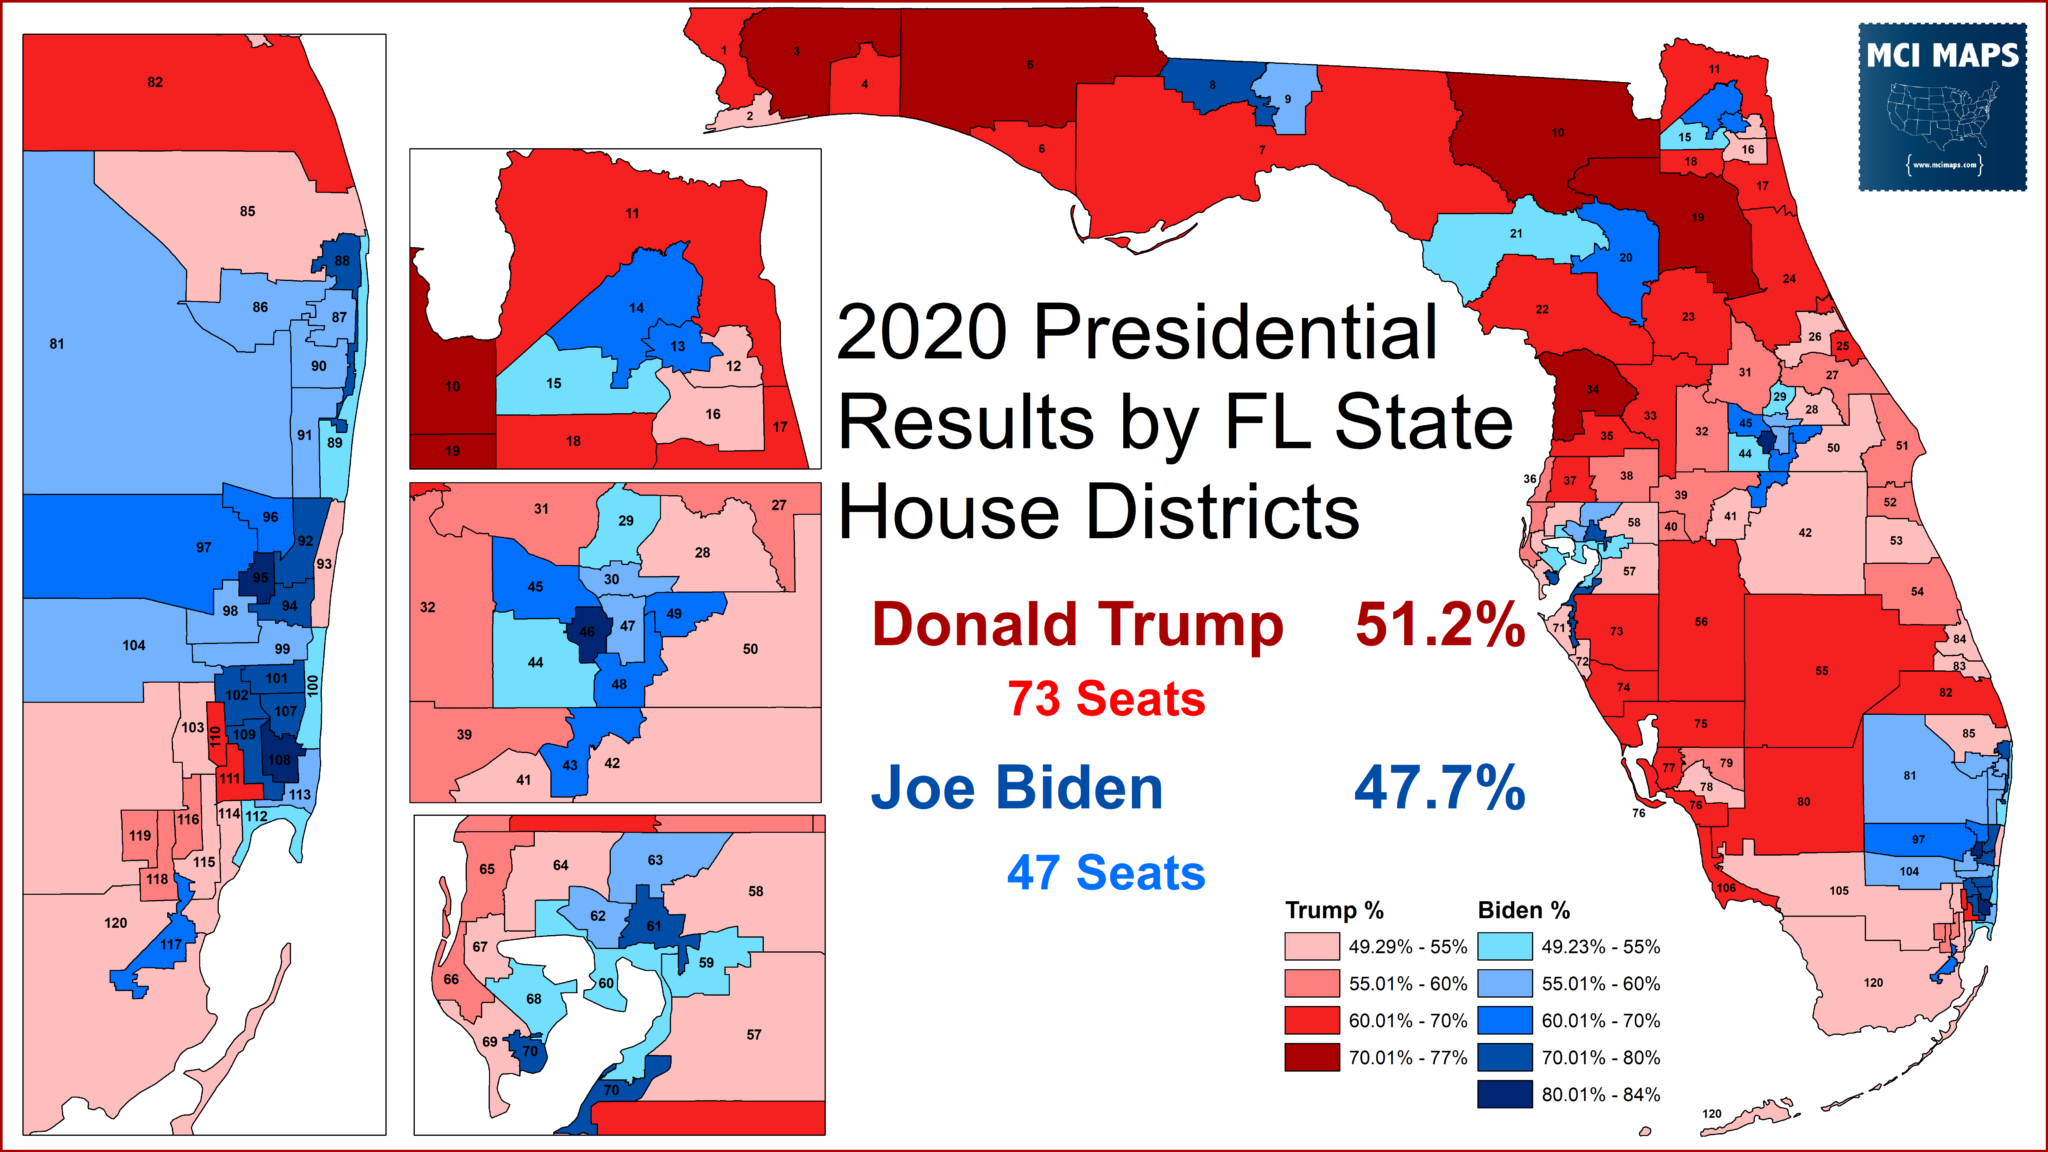 How Florida’s State House Districts Voted in 2020 MCI Maps Election